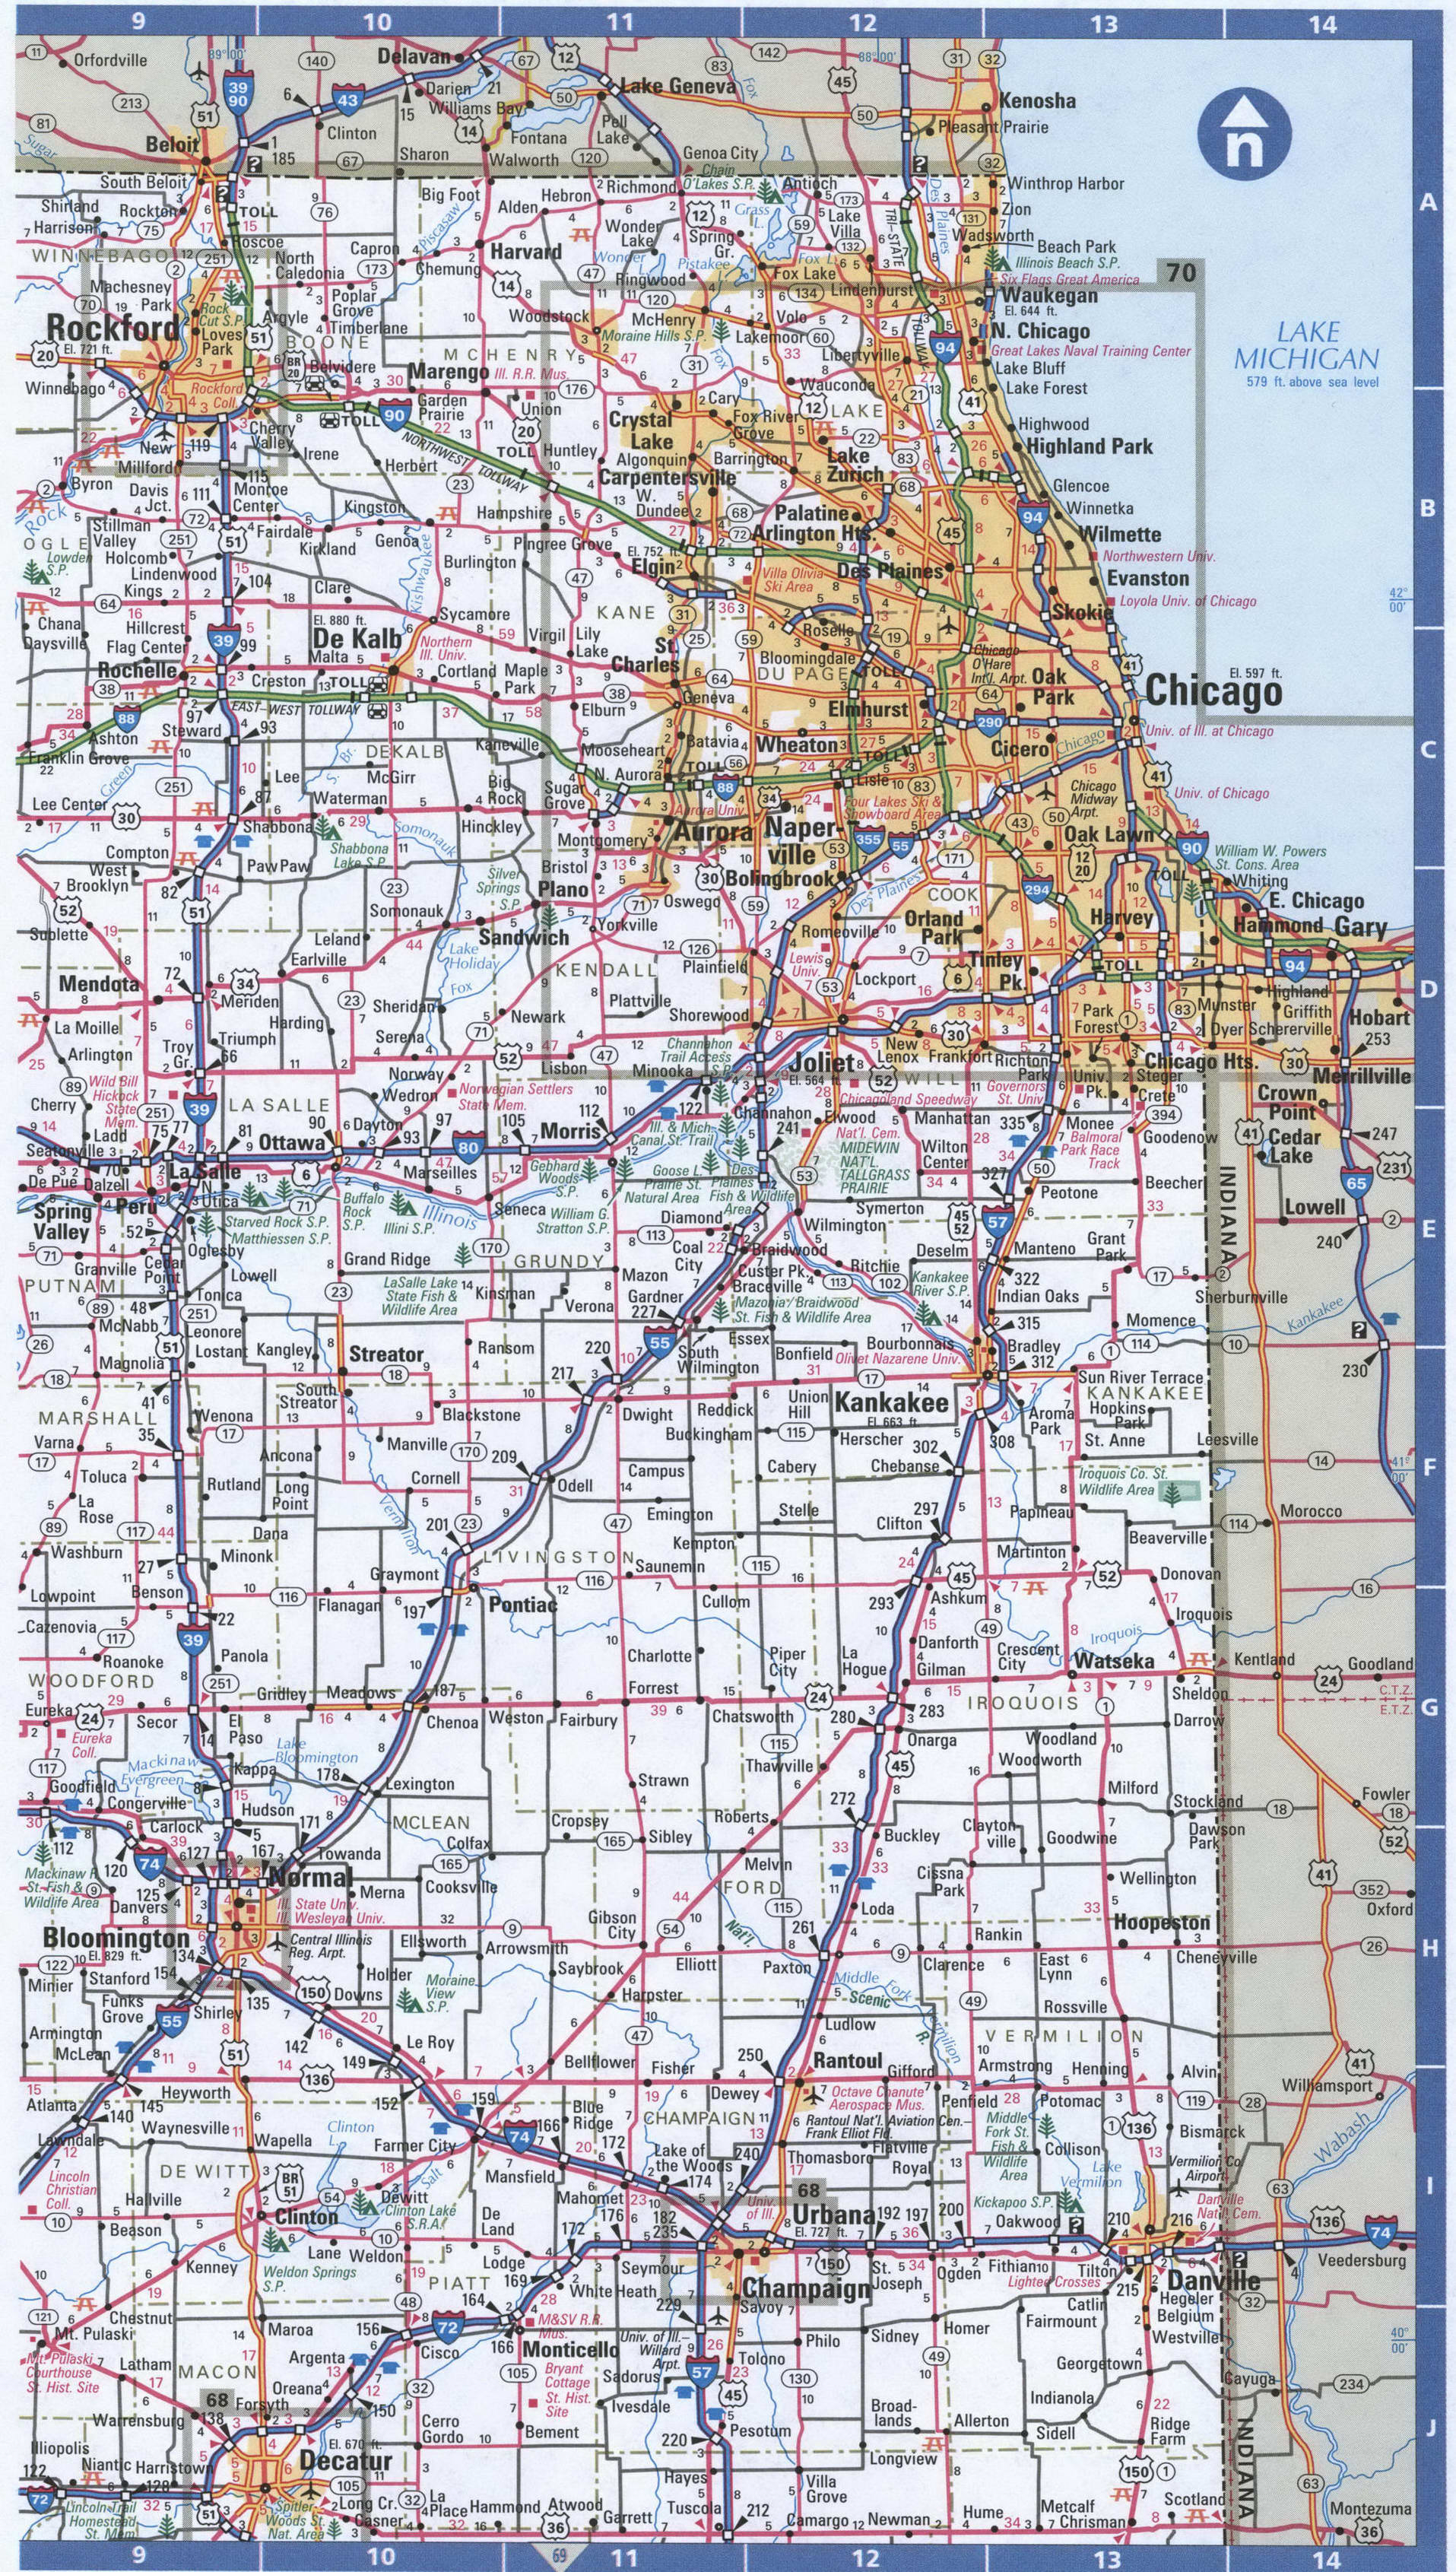 Illinois Northern roads map. Map of North Illinois cities and highways